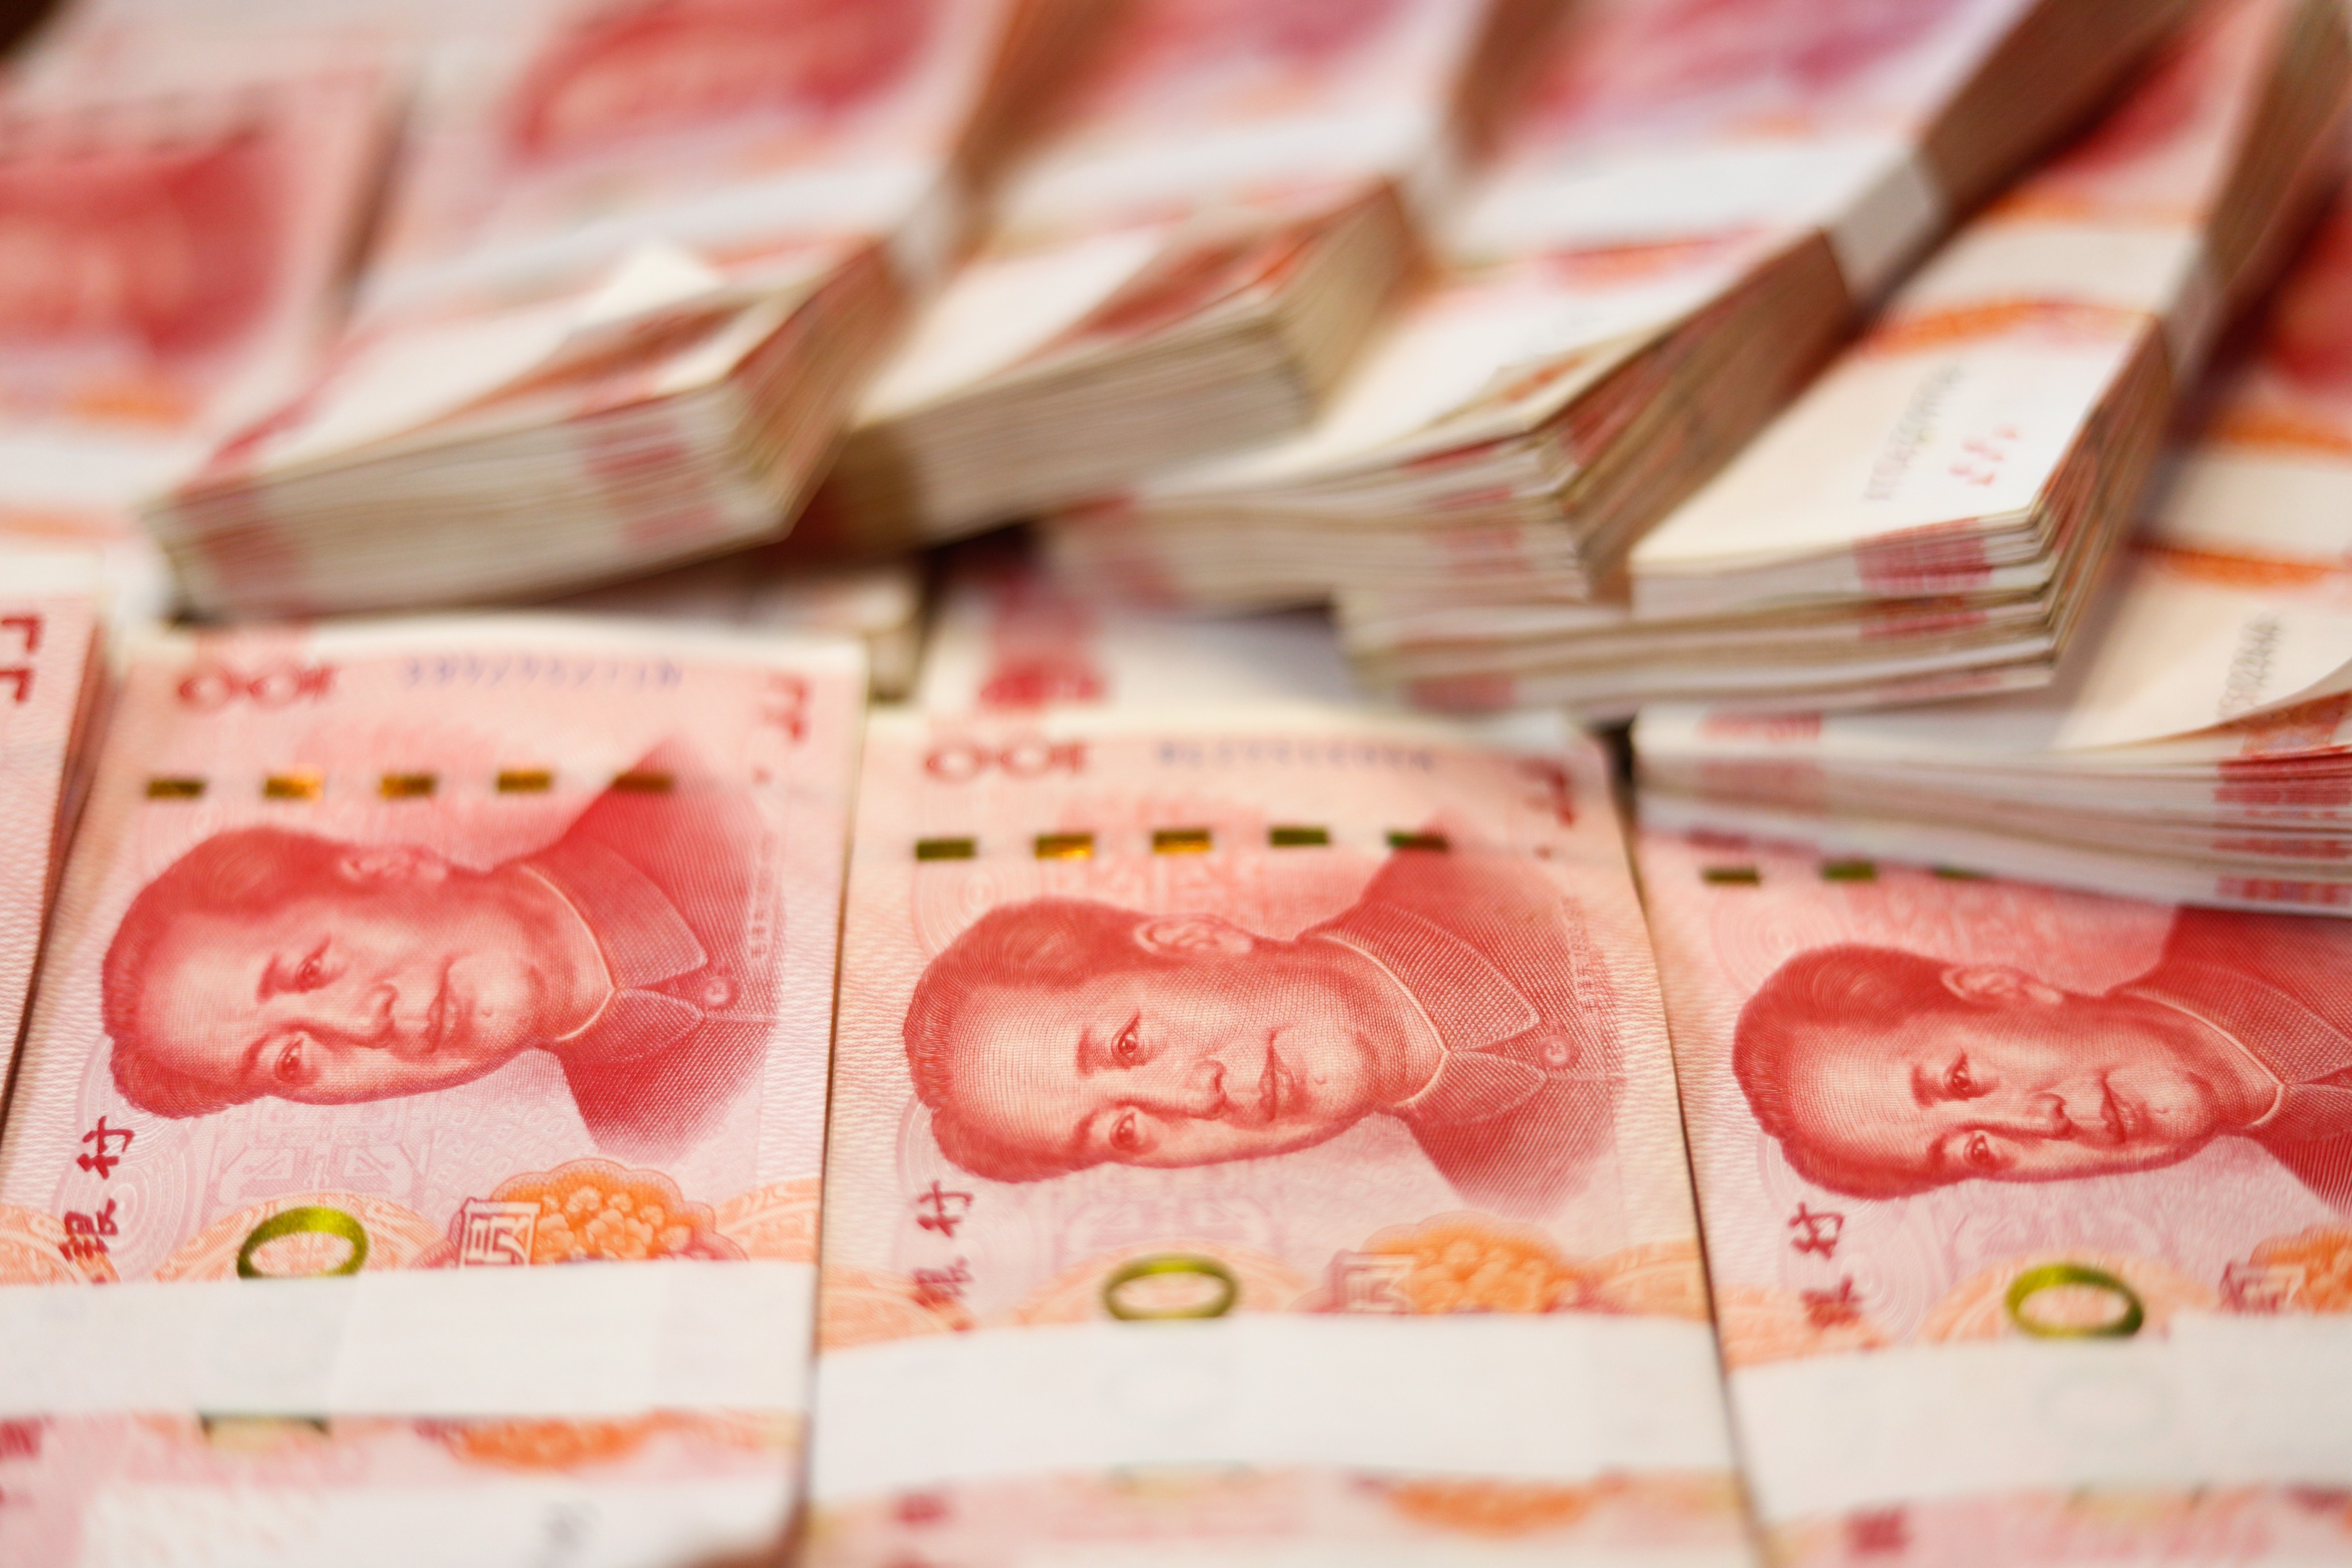 The bank scandal in Henan has drawn rare protests and shaken confidence in China’s financial stability. Photo: Shutterstock